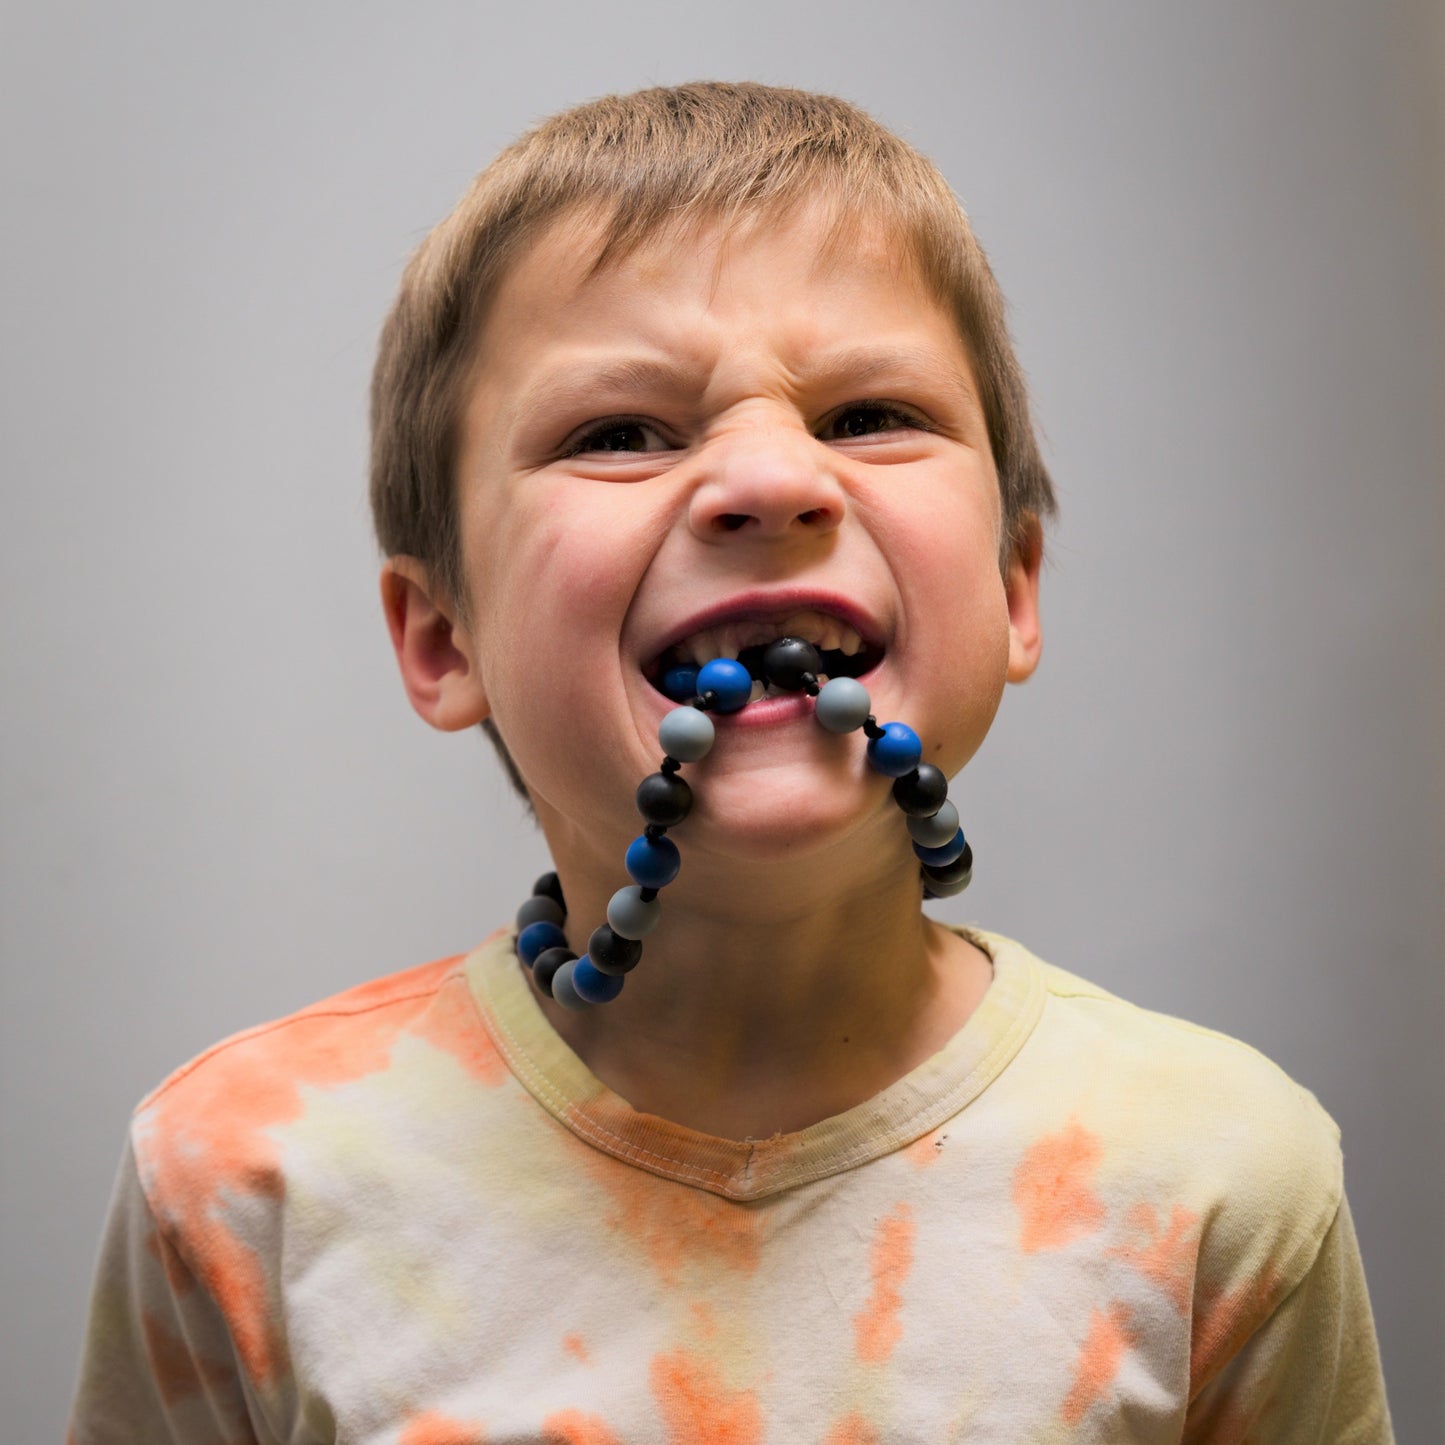 Boy gnawing on anxiety necklace. In mouth.